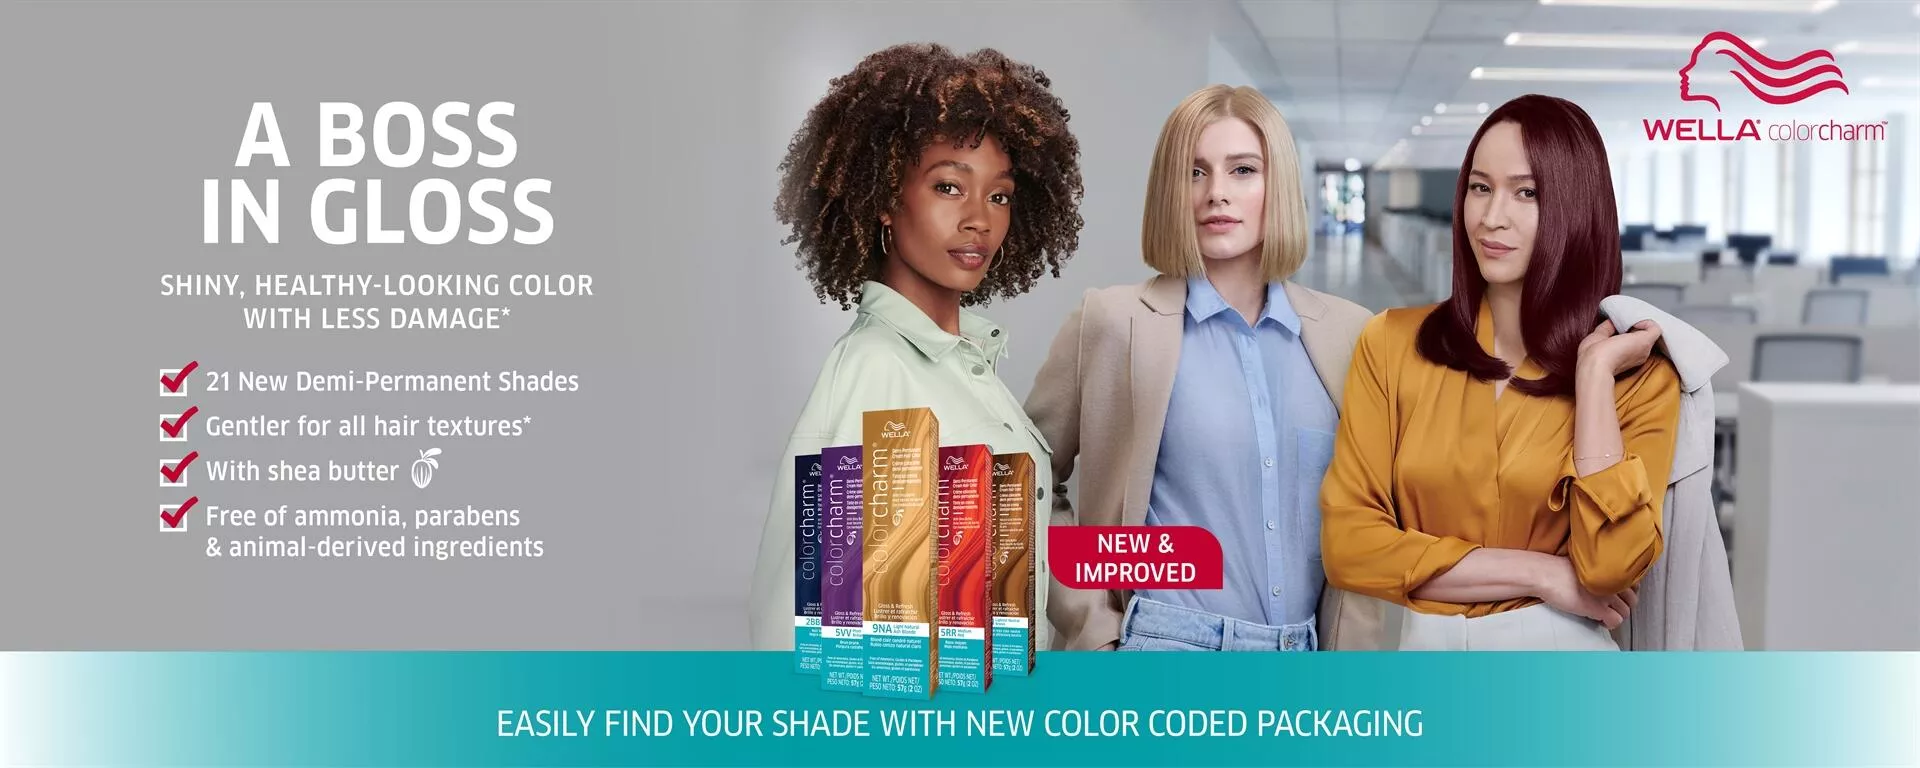 New Wella colorcharm Demi-Permanent Color offers shiny, healthy looking color withless damage.